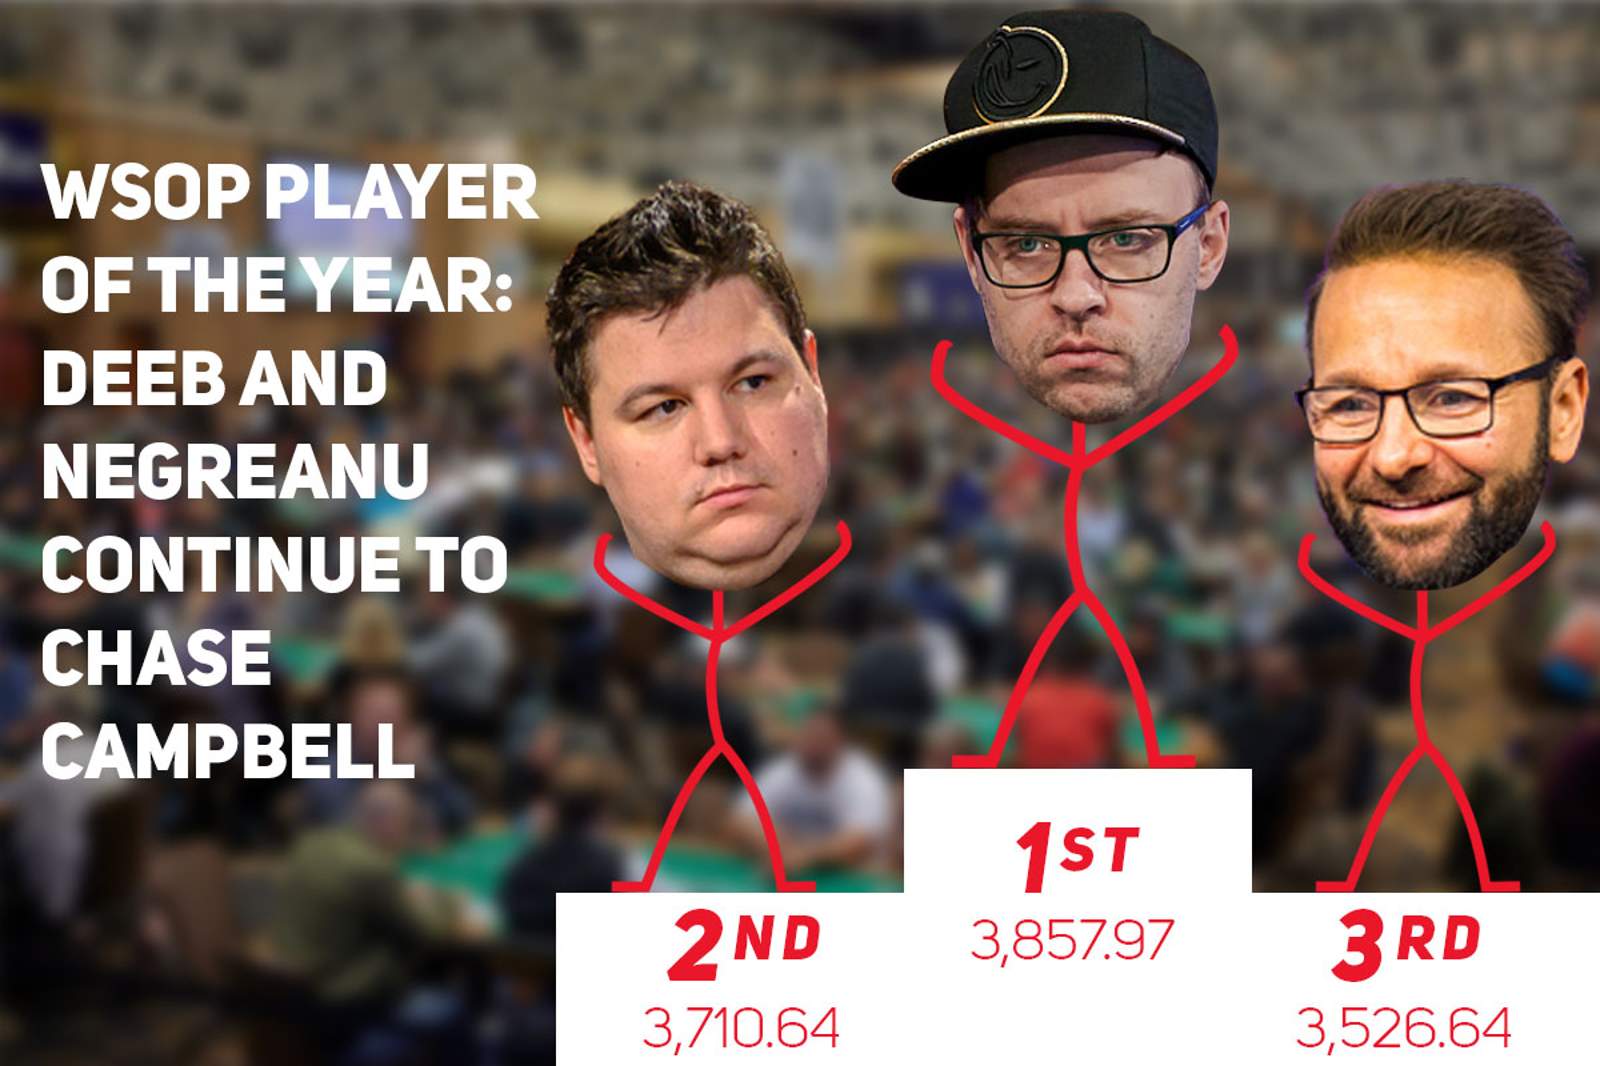 Daniel Negreanu & Shaun Deeb Chase Robert Campbell for WSOP Player of the Year Honors